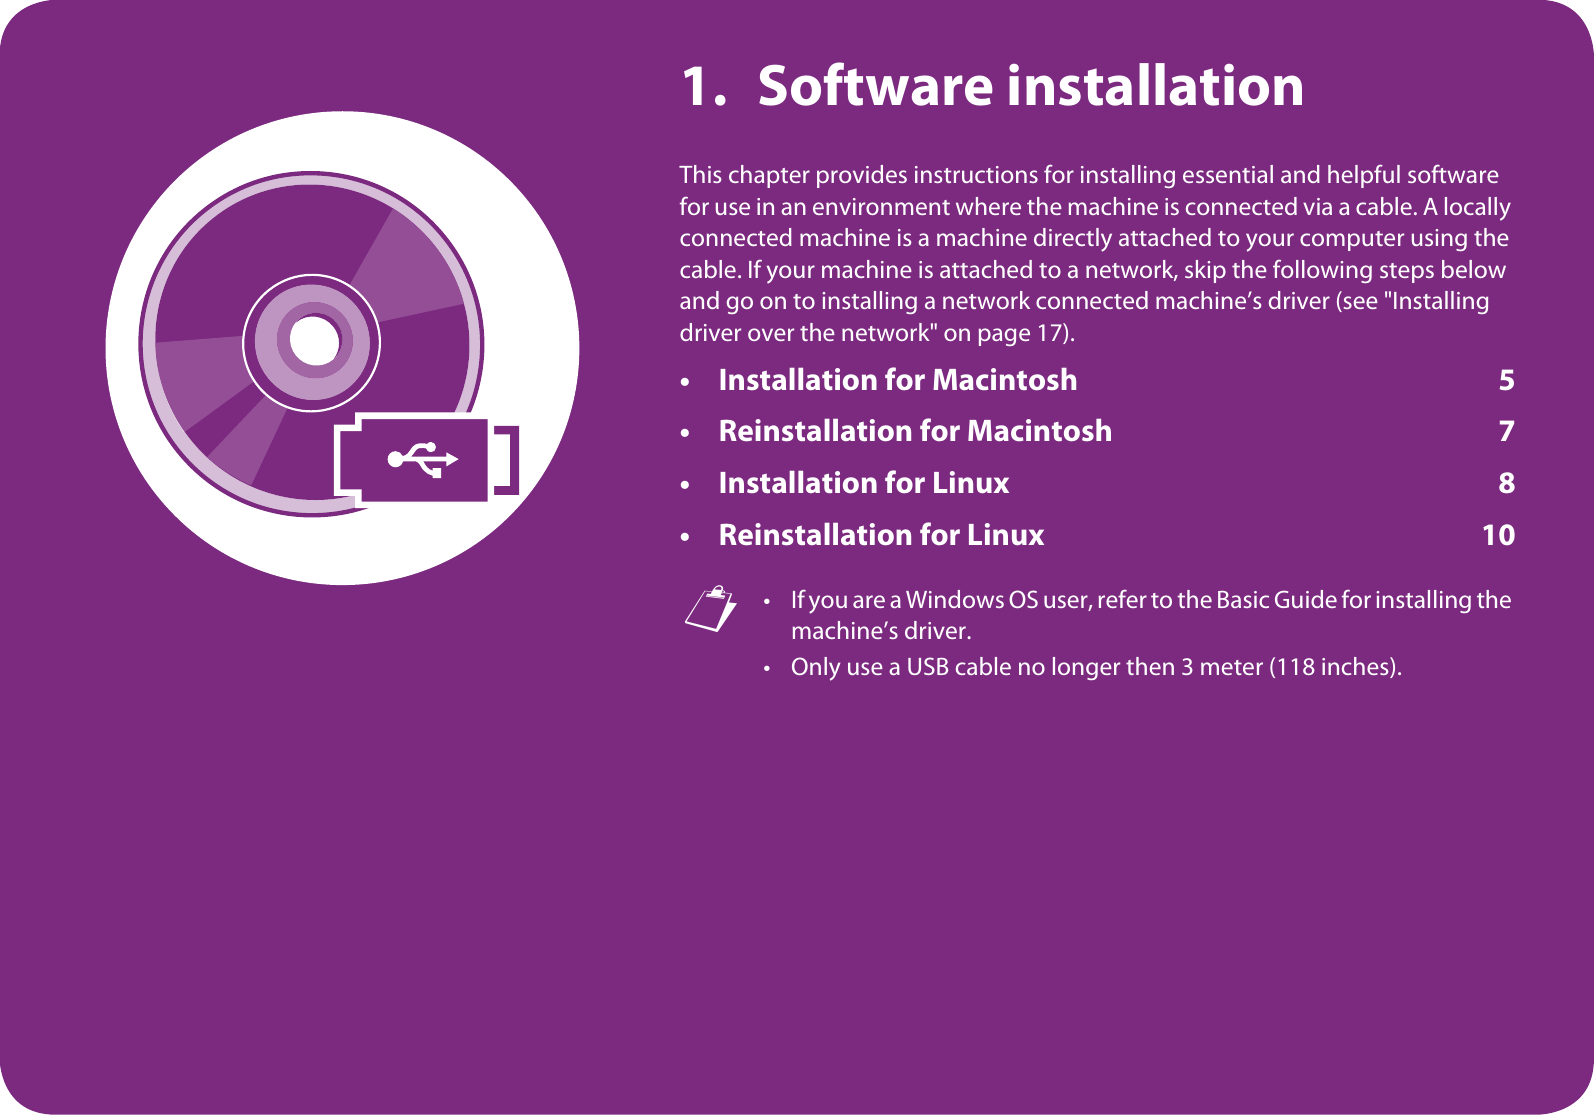 1. Software installationThis chapter provides instructions for installing essential and helpful software for use in an environment where the machine is connected via a cable. A locally connected machine is a machine directly attached to your computer using the cable. If your machine is attached to a network, skip the following steps below and go on to installing a network connected machine’s driver (see &quot;Installing driver over the network&quot; on page 17).• Installation for Macintosh 5• Reinstallation for Macintosh 7• Installation for Linux 8• Reinstallation for Linux 10 • If you are a Windows OS user, refer to the Basic Guide for installing the machine’s driver.• Only use a USB cable no longer then 3 meter (118 inches).